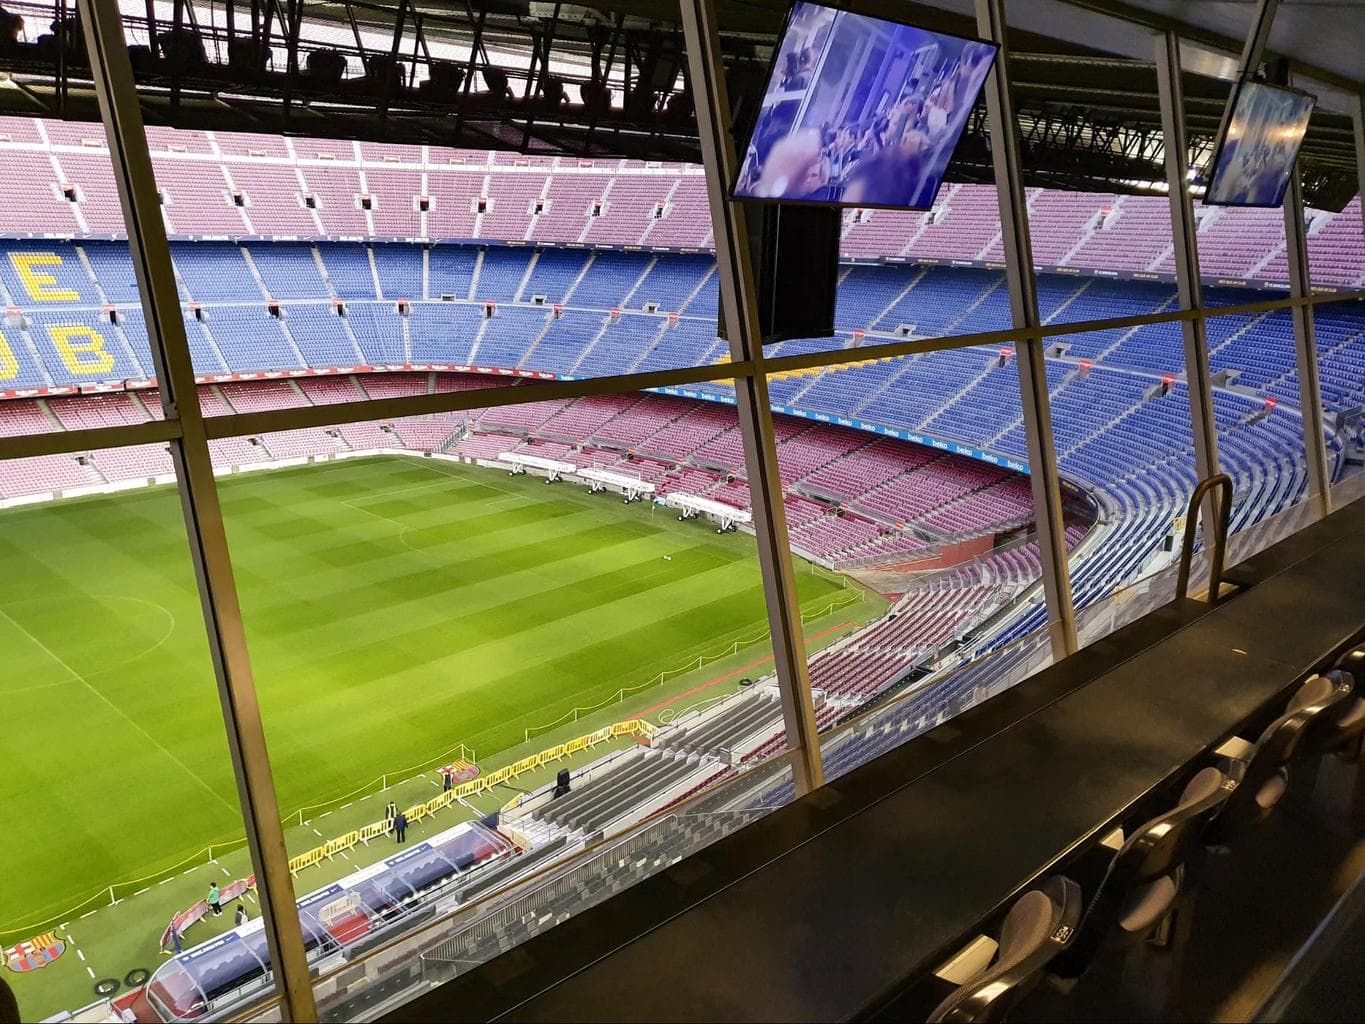 Camp Nou stadium seen from the media box